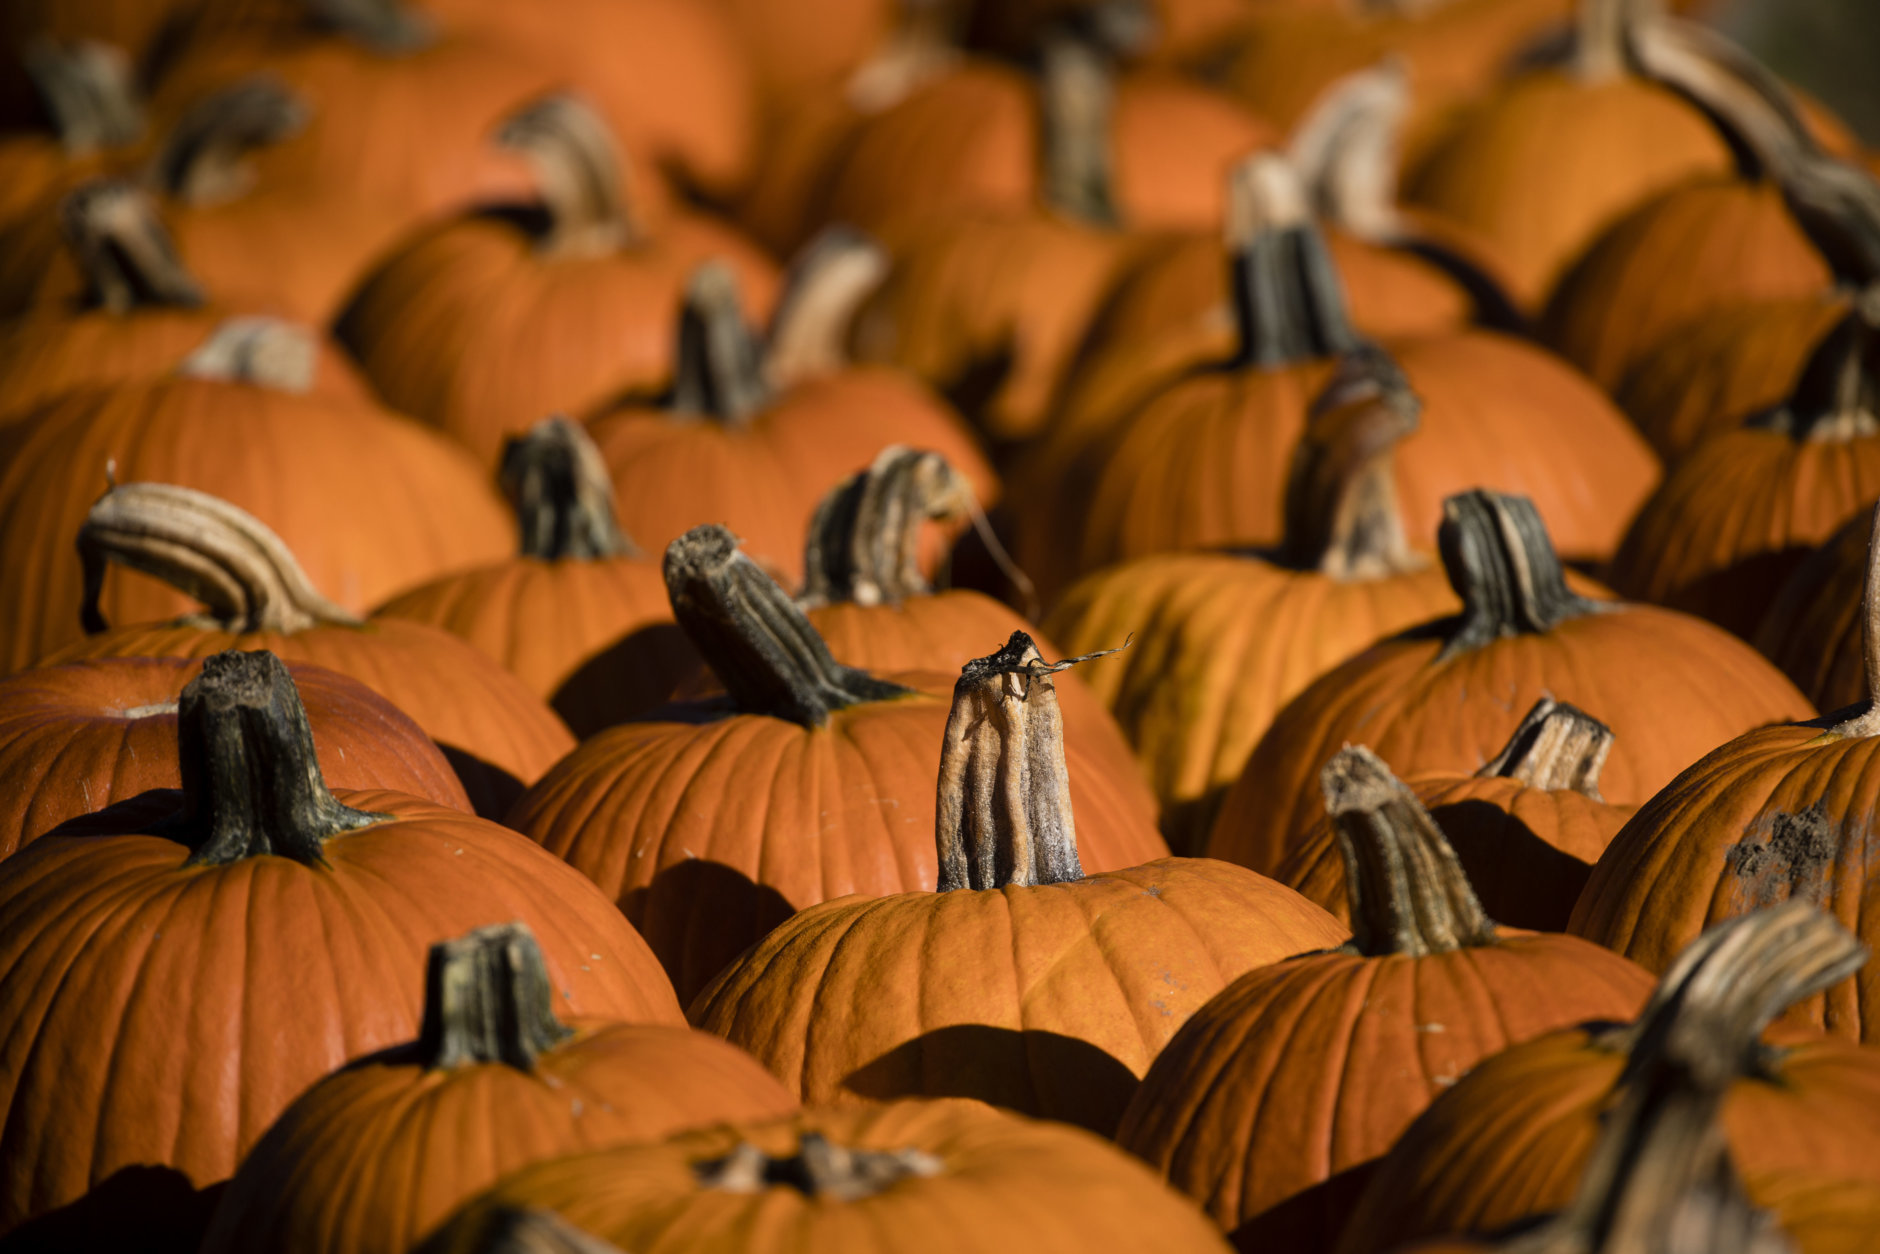 Pumpkins are set out for sale at Maple Acres Farm in Plymouth Meeting, Pa., Tuesday, Oct. 17, 2017. (AP Photo/Matt Rourke)